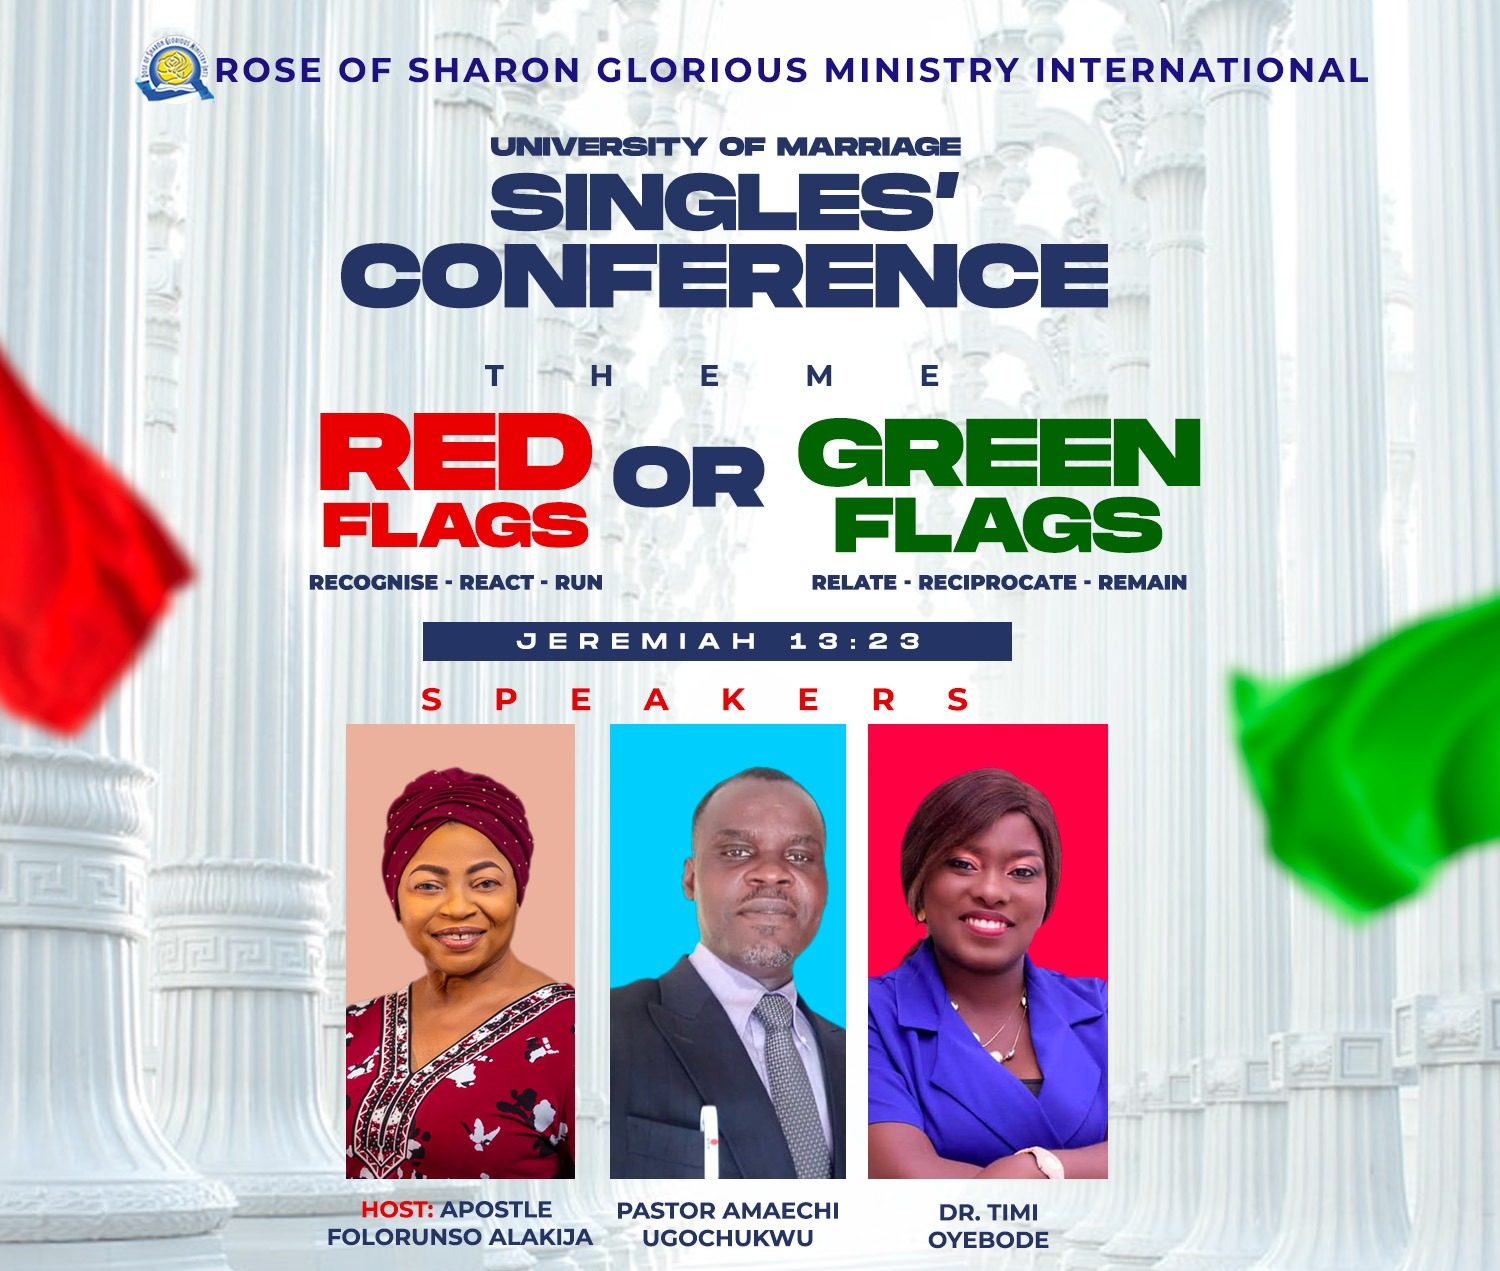 University of Marriage Singles' Conference 2023 RoSGMIRose of Sharon